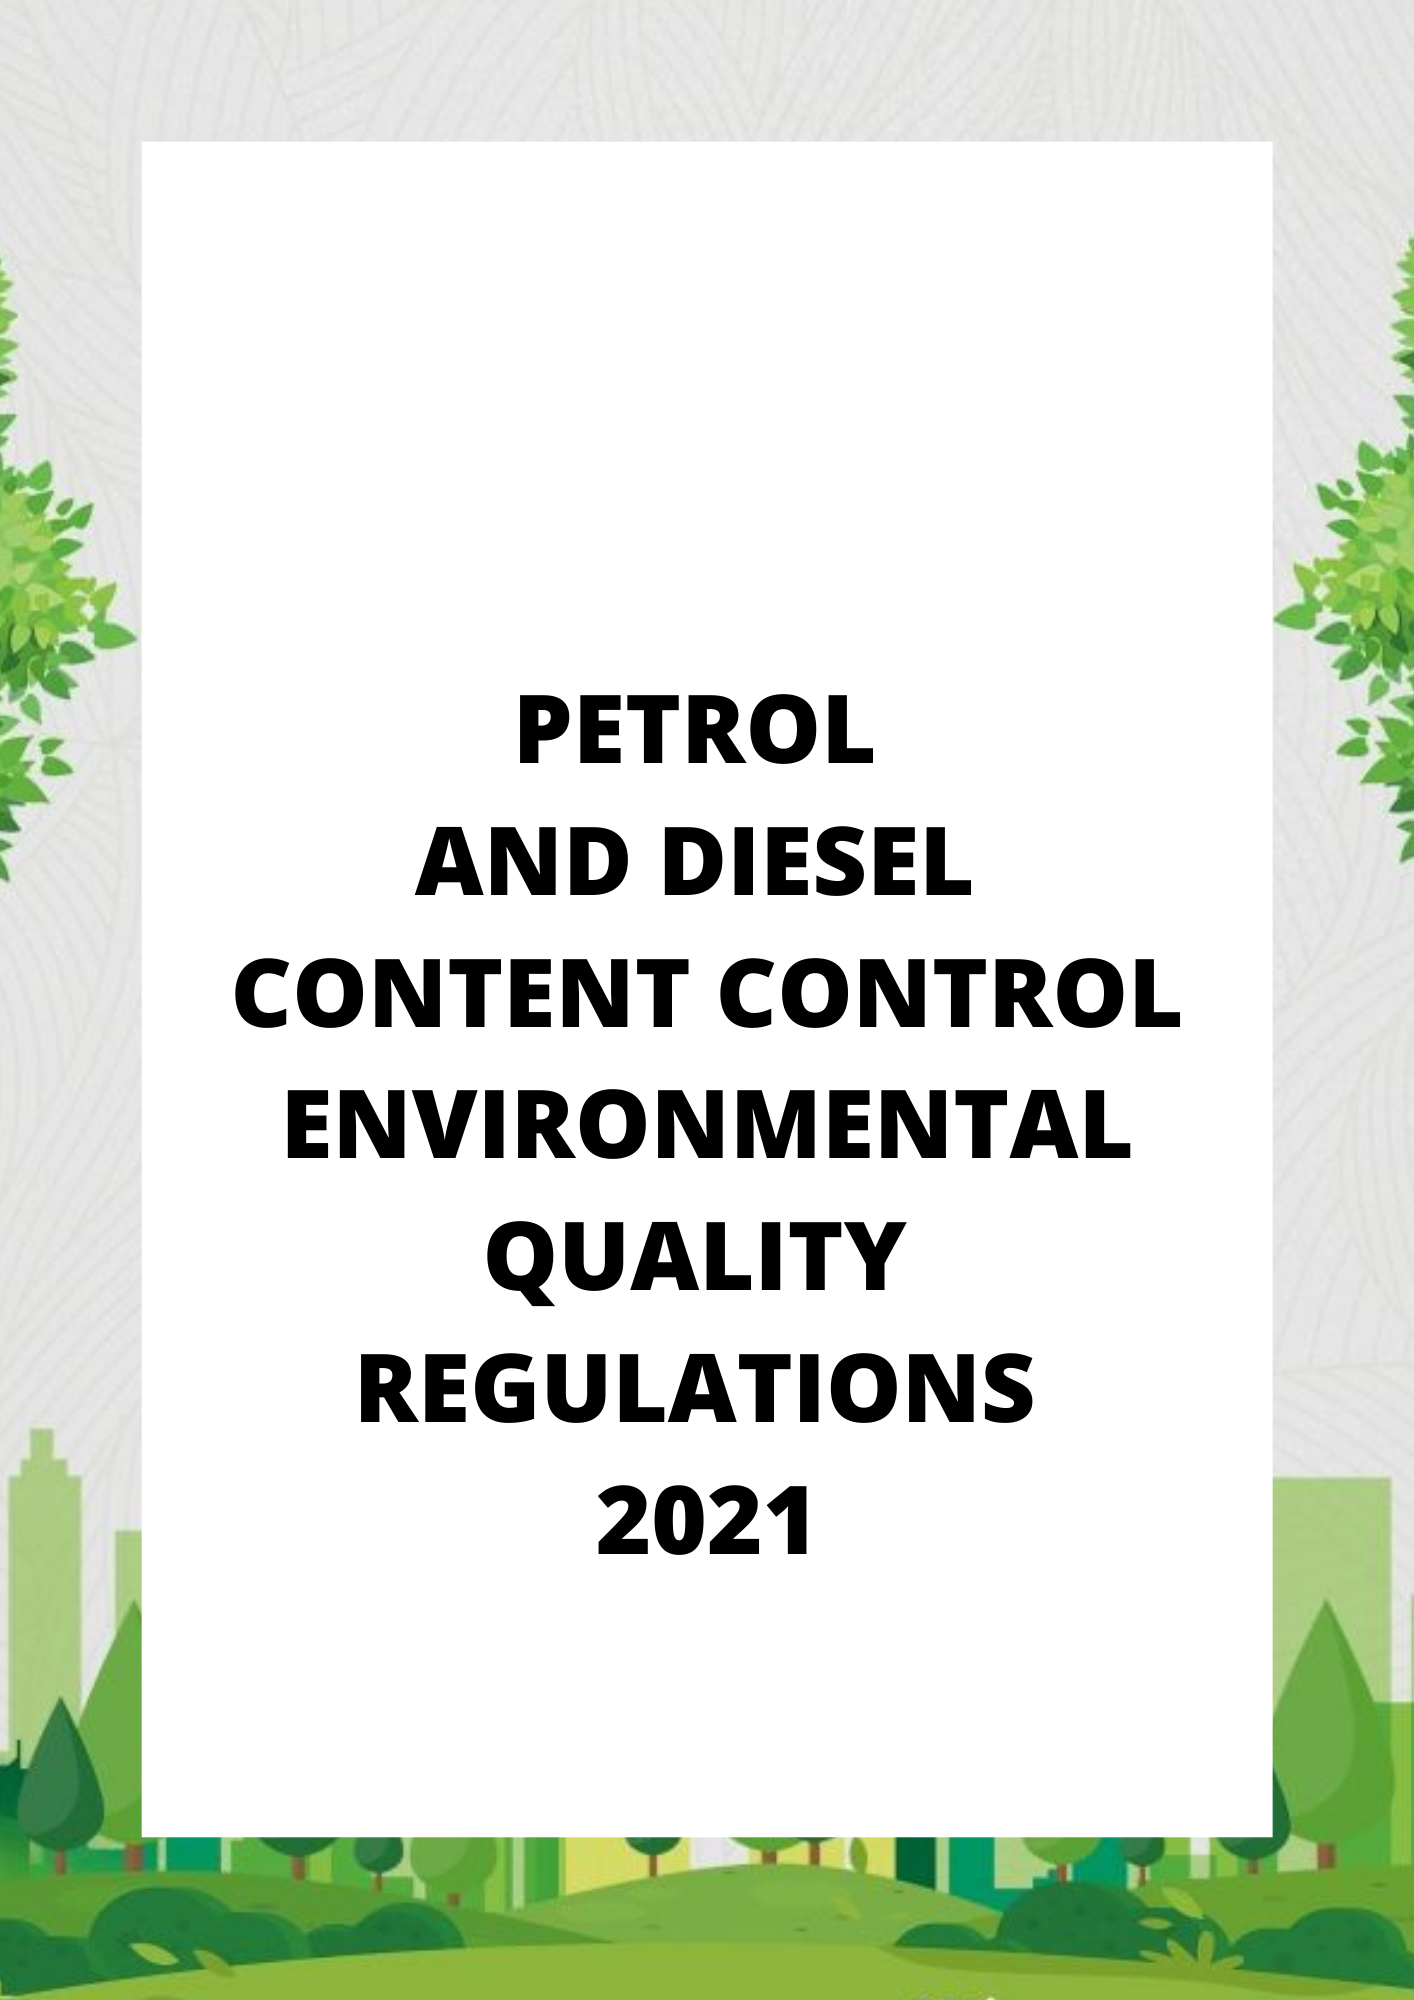 Petrol and Diesel Content Control Environmental Quality Regulations 2021